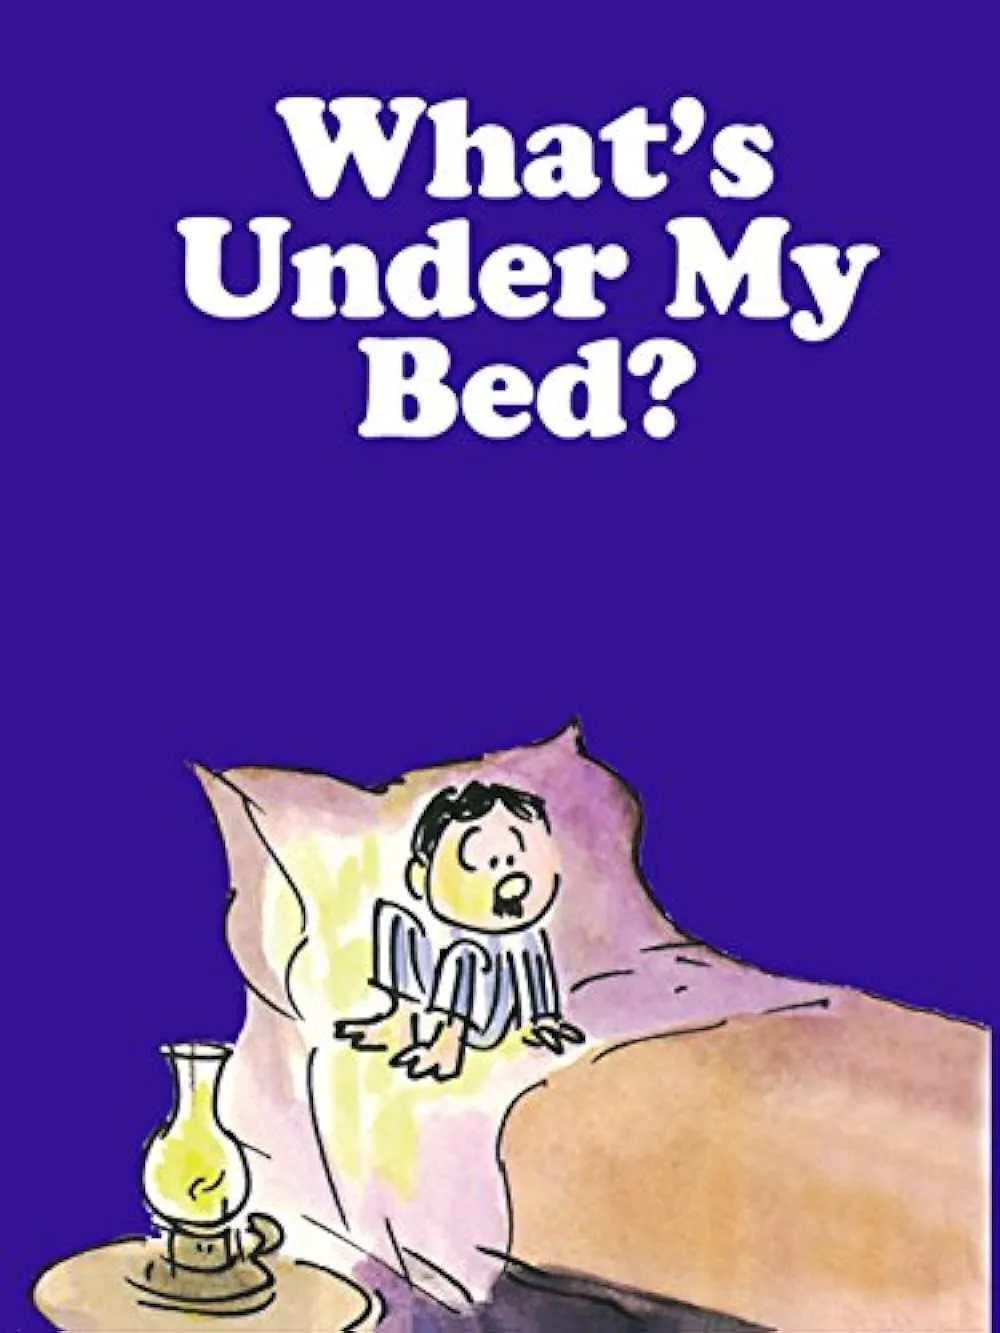     What's Under My Bed?